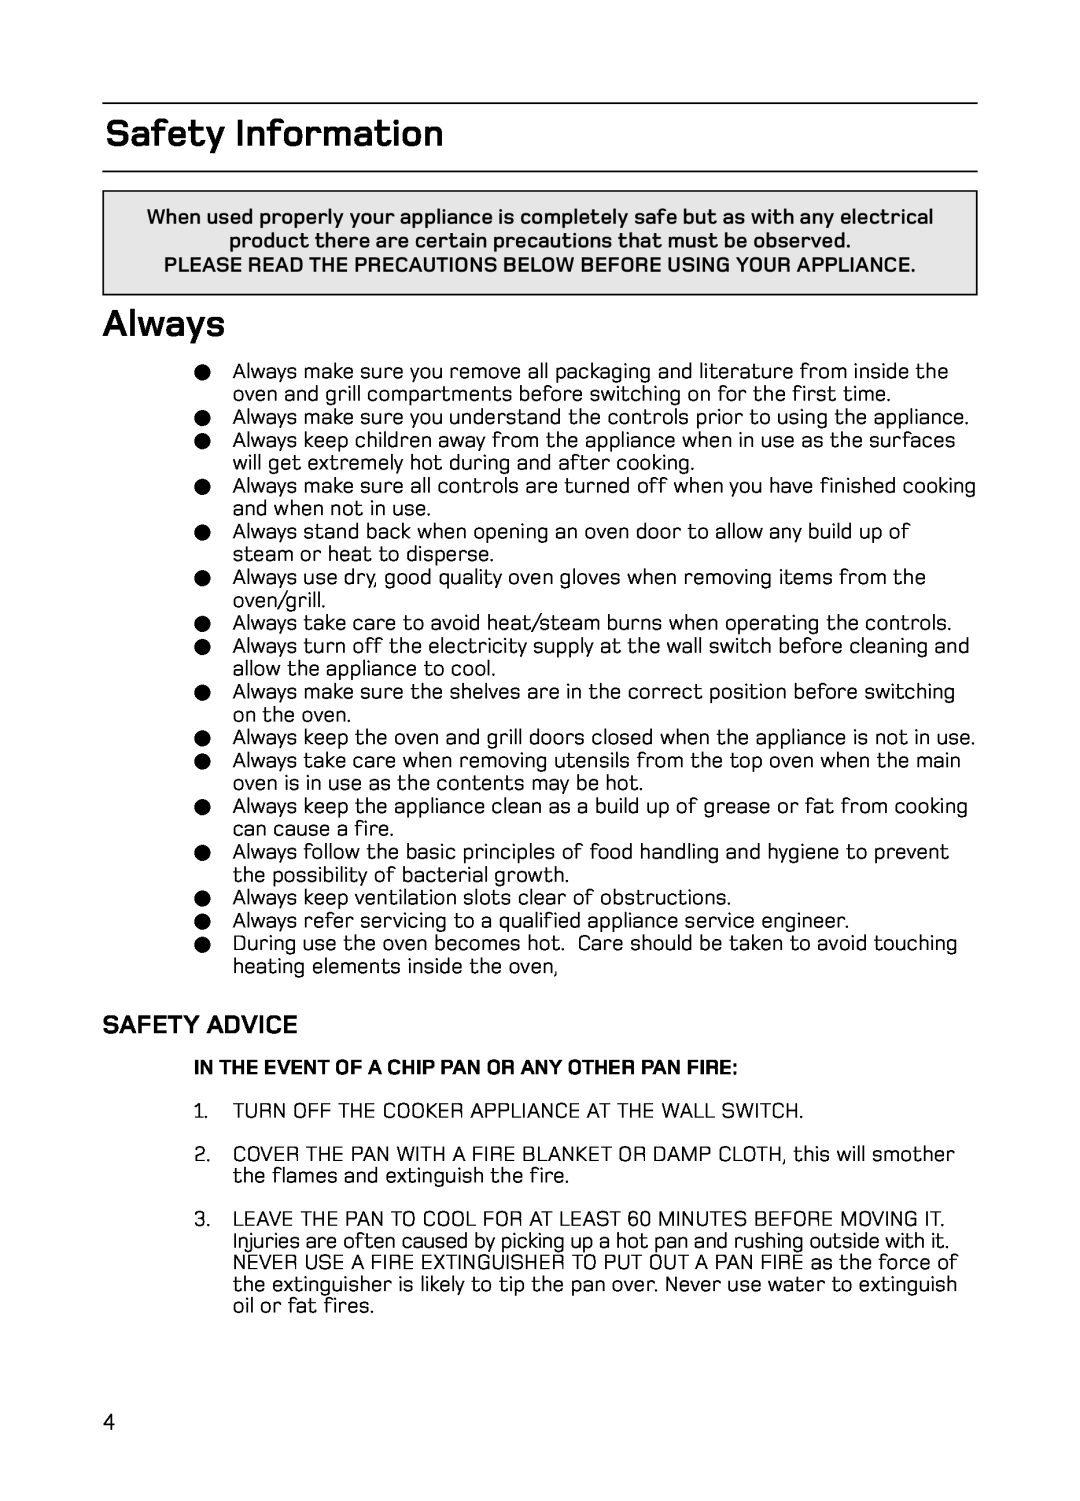 Hotpoint S130E Mk2 Safety Information, Always, Safety Advice, product there are certain precautions that must be observed 